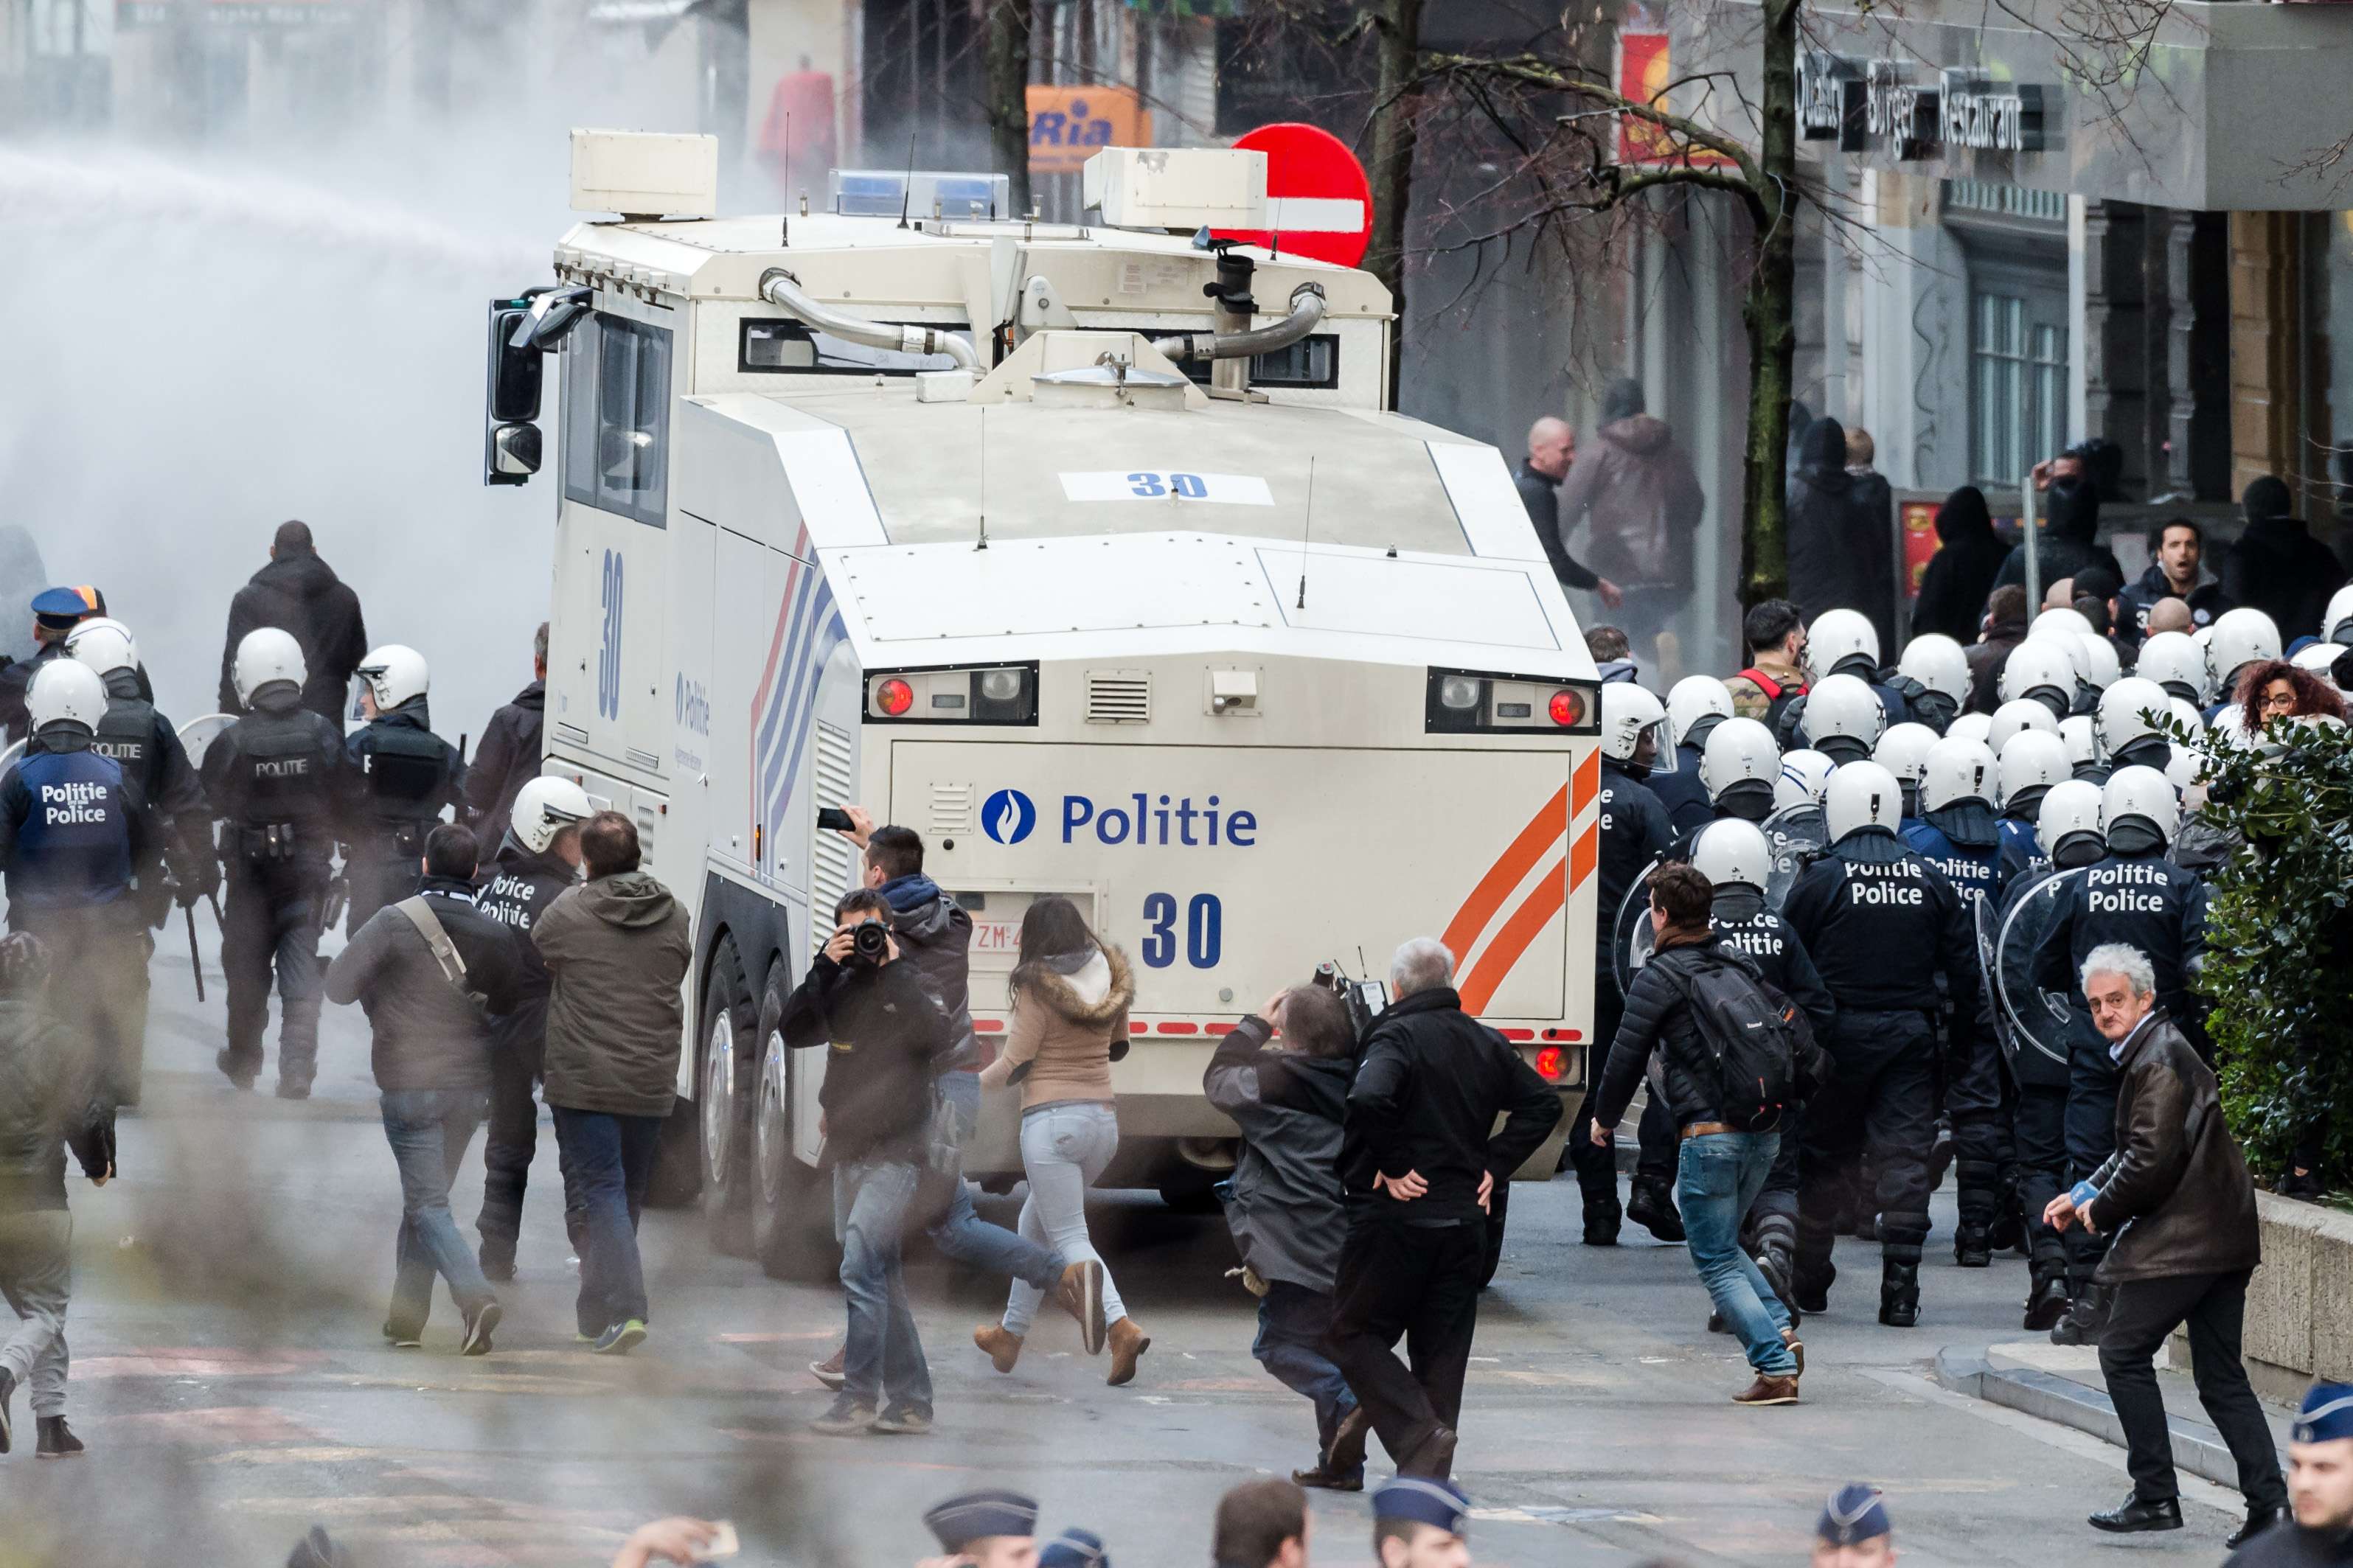 Police use a water cannon as far-right demonstrators protest at a memorial in Brussels. Photo: AP